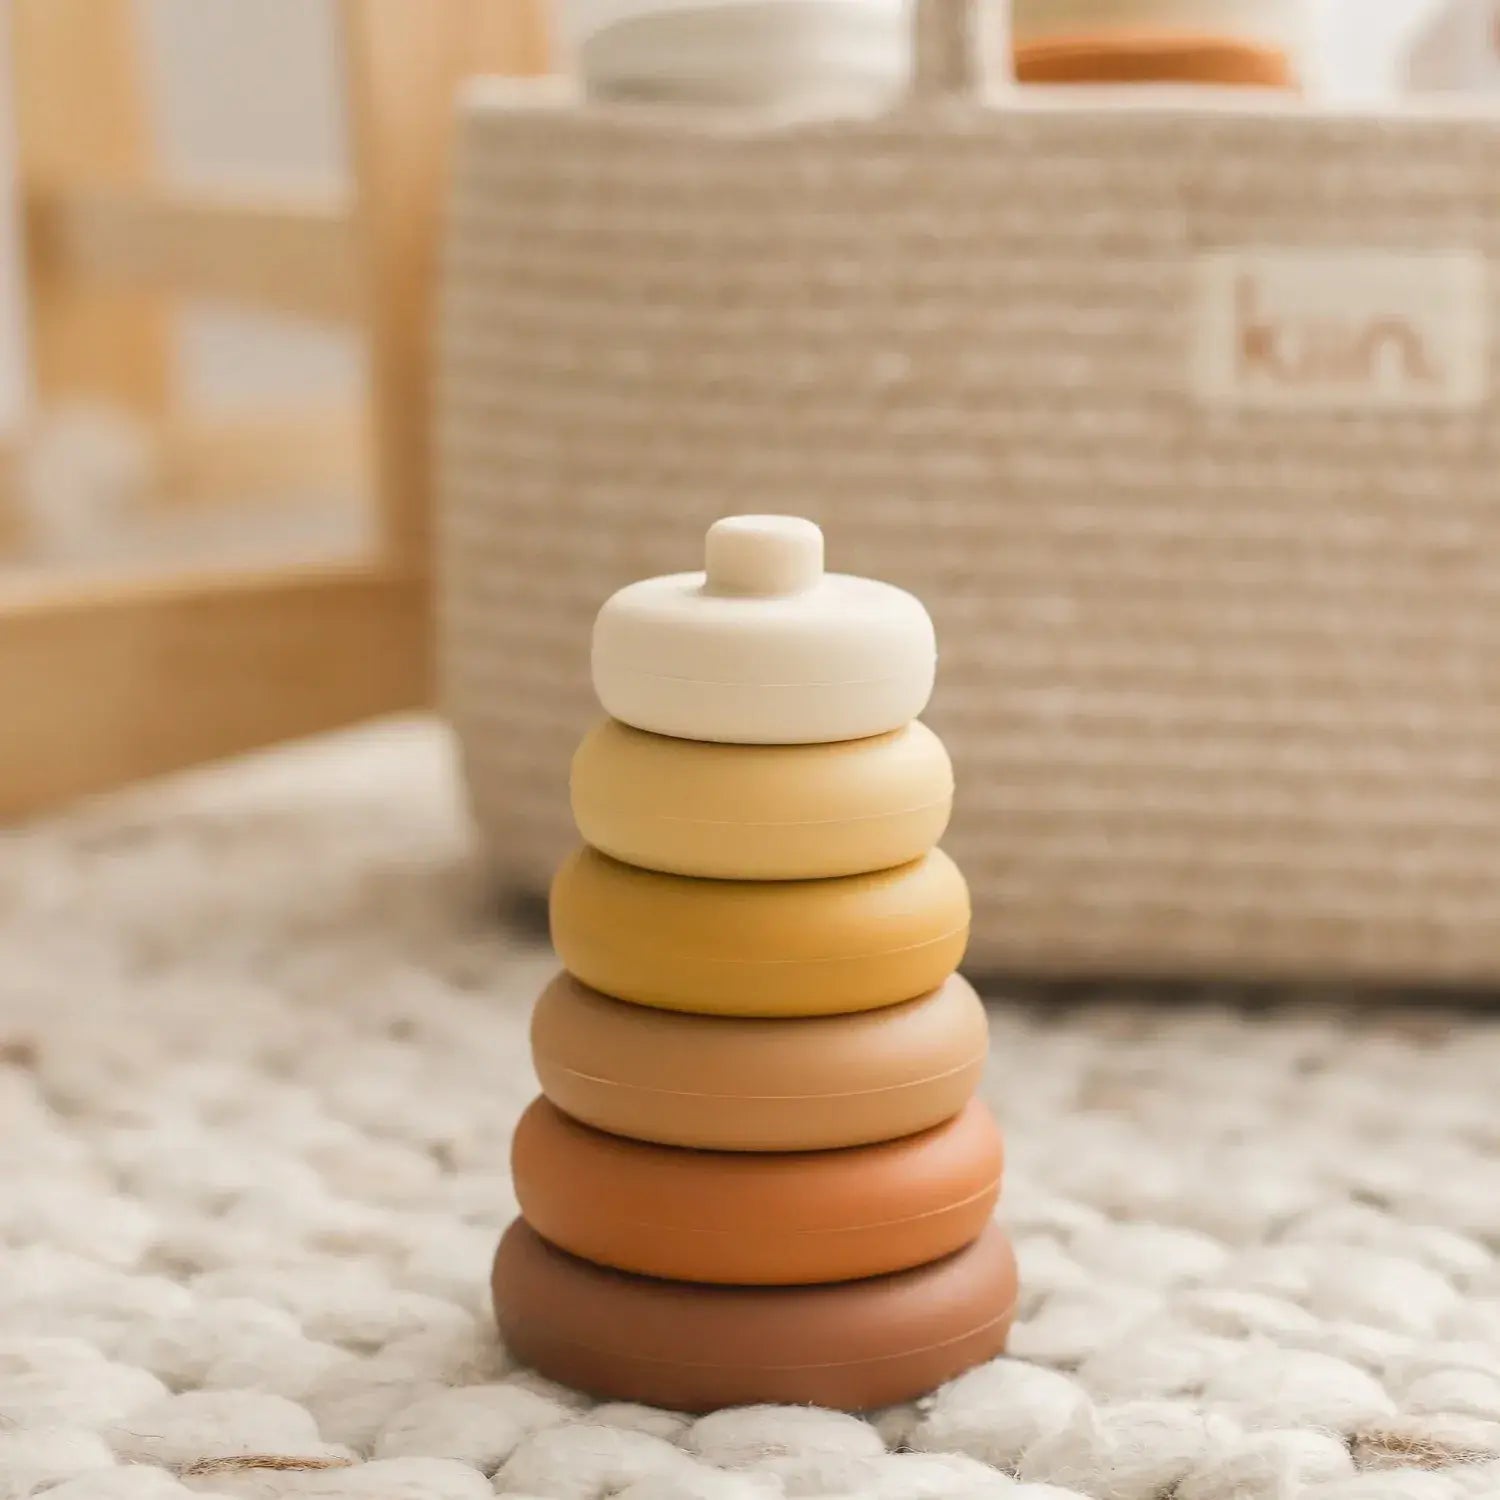 Round Stacking Teething Tower Toy by Kiin